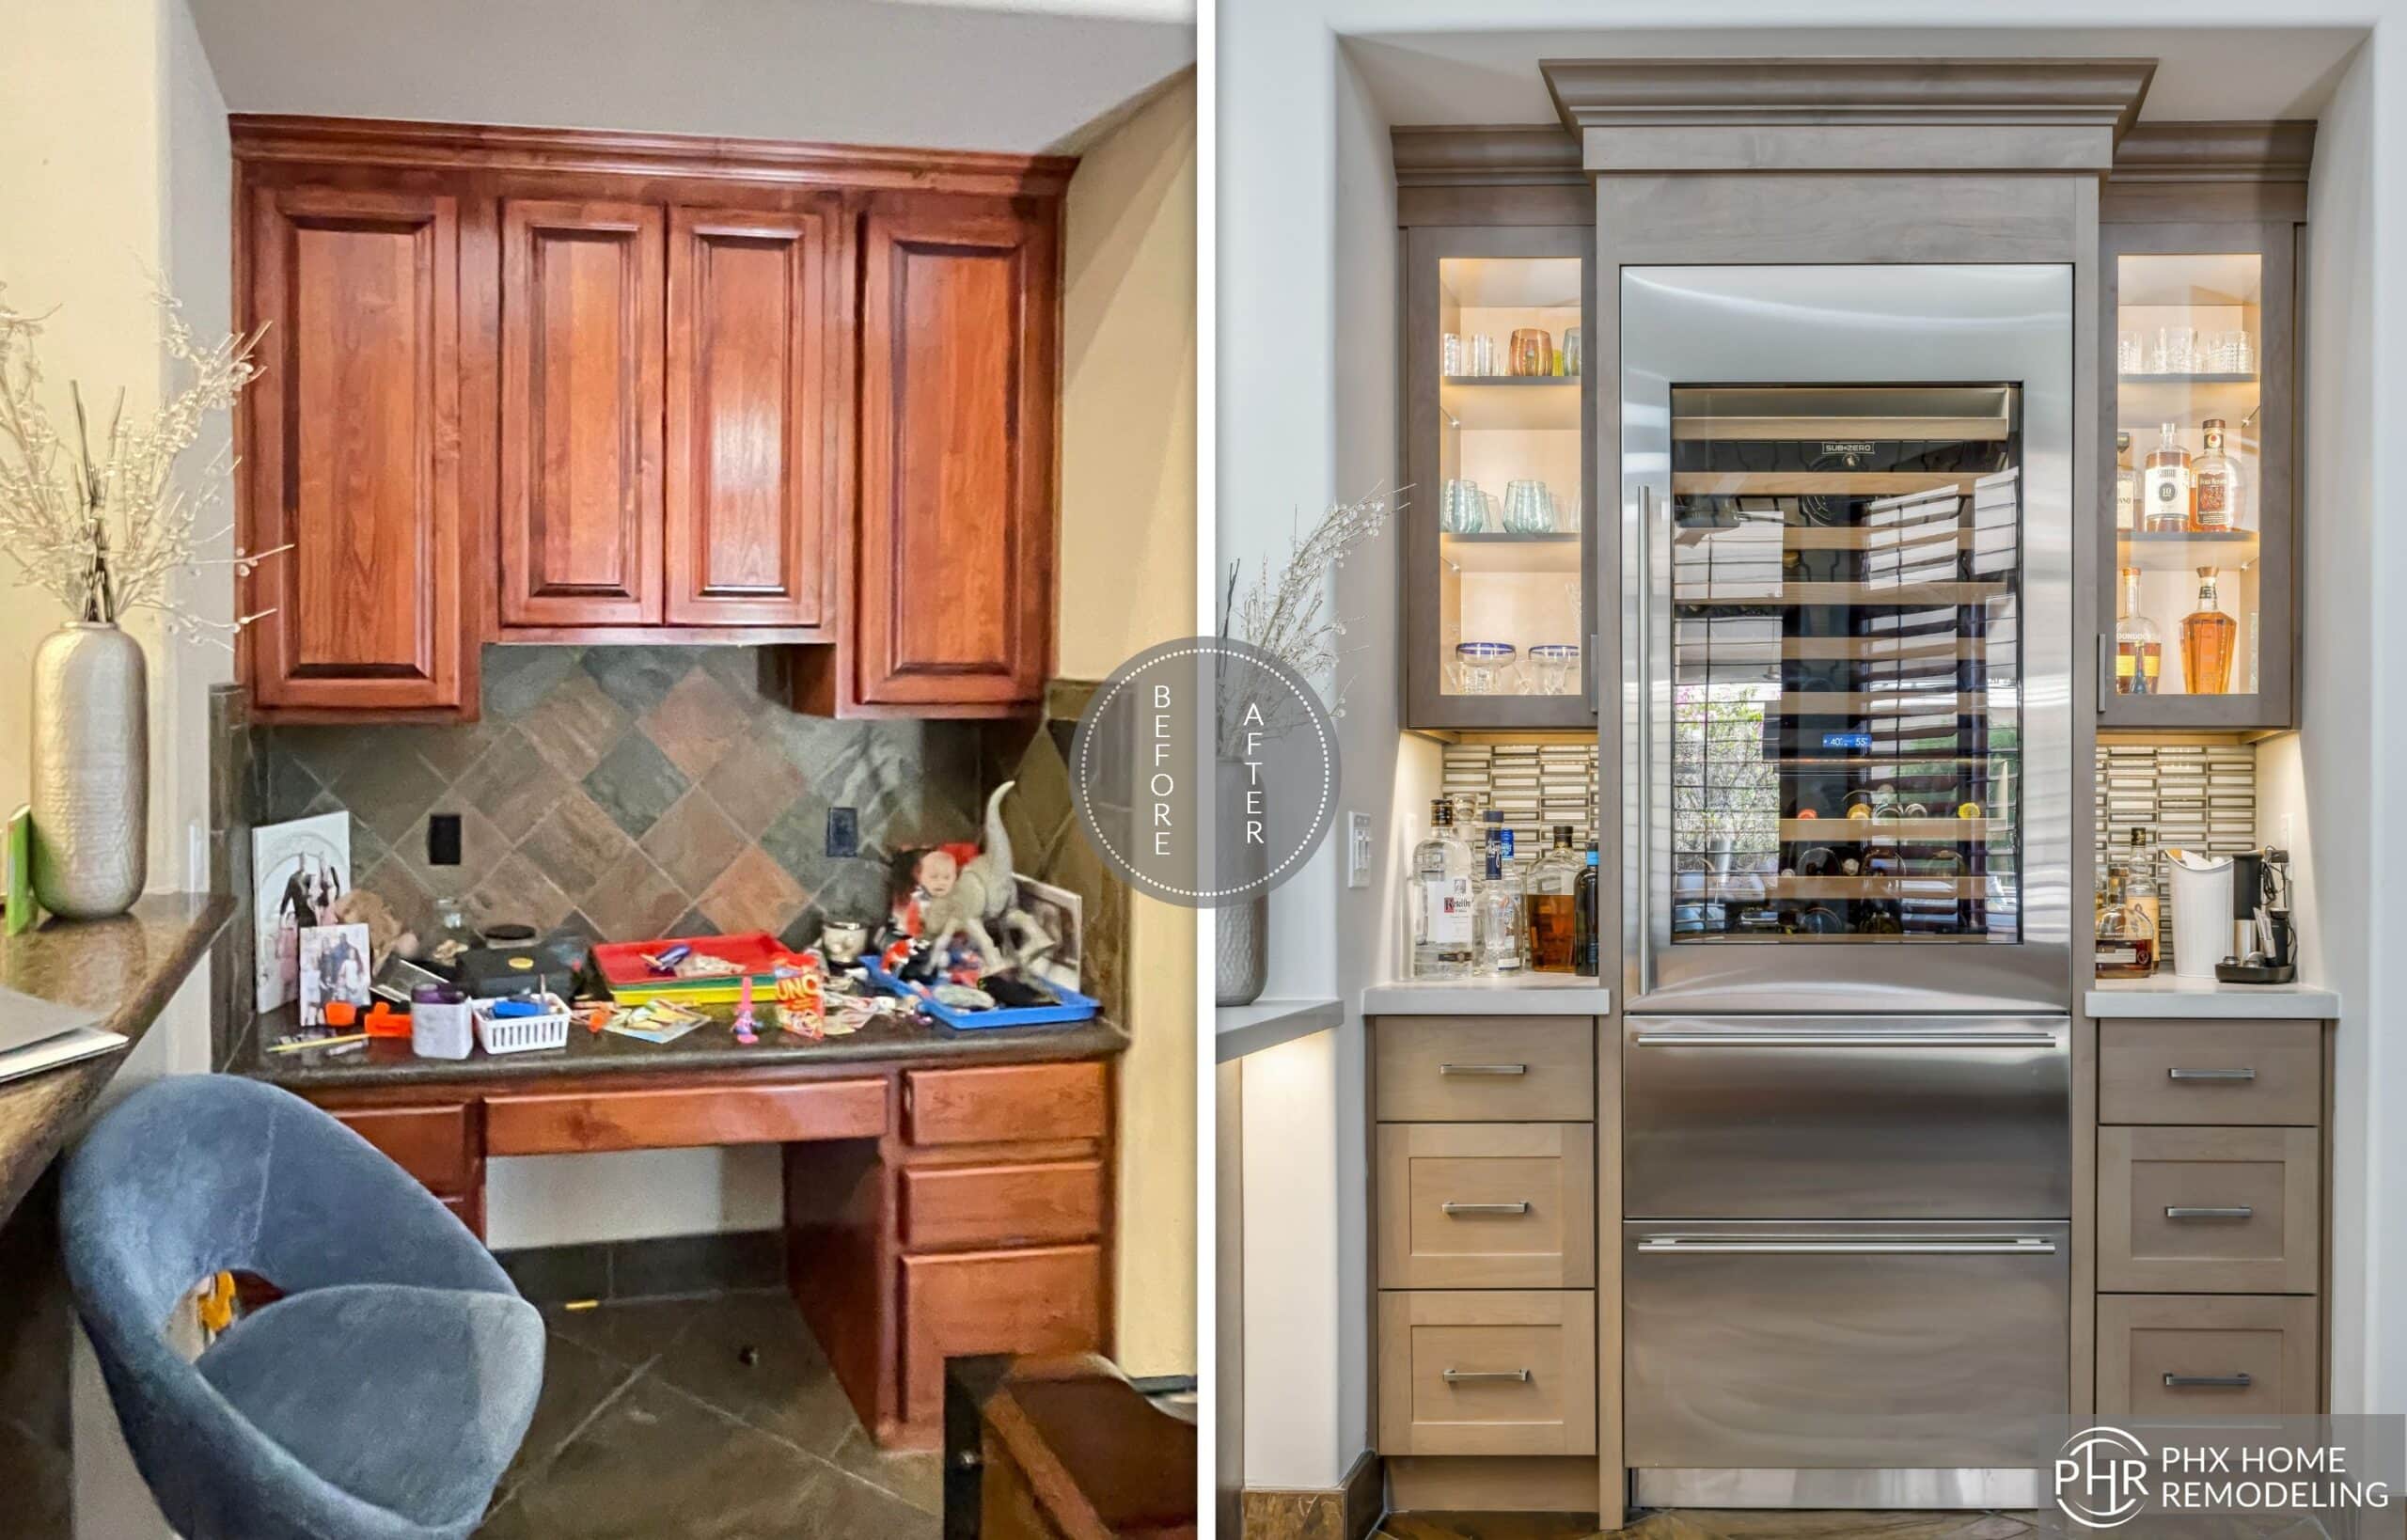 Discover The Astounding Before And After Transformation Of A Closet Remodel With Our General Contractor Services